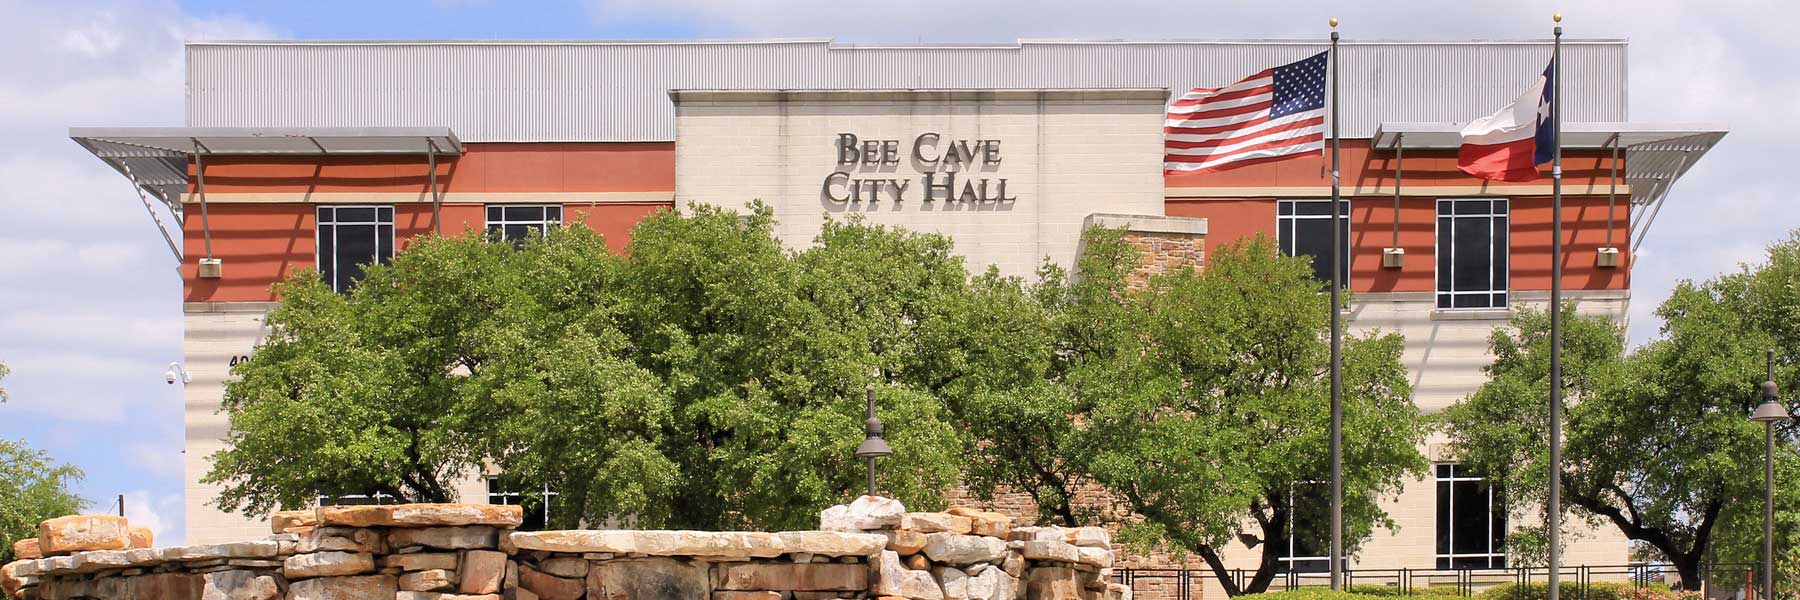 Image of Bee Cave Municipal Court